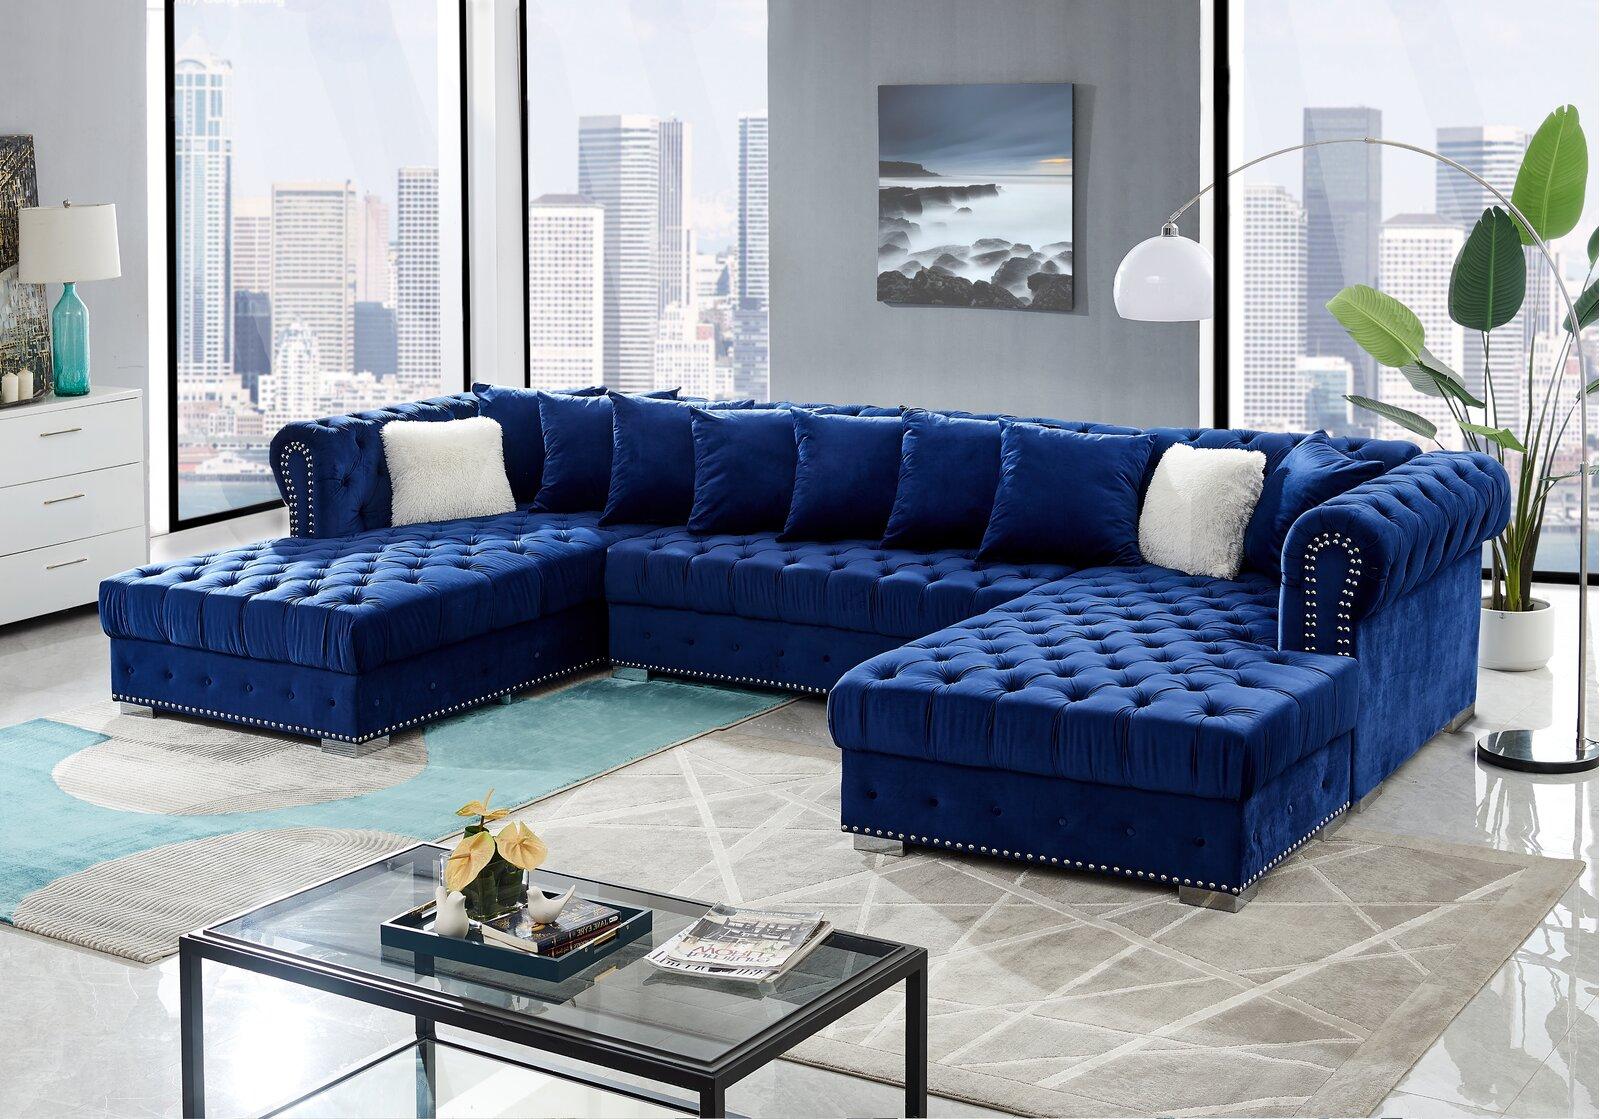 

    
Glam Blue Velvet Tufted Sectional Sofa MONALISA Galaxy Home Contemporary Modern
